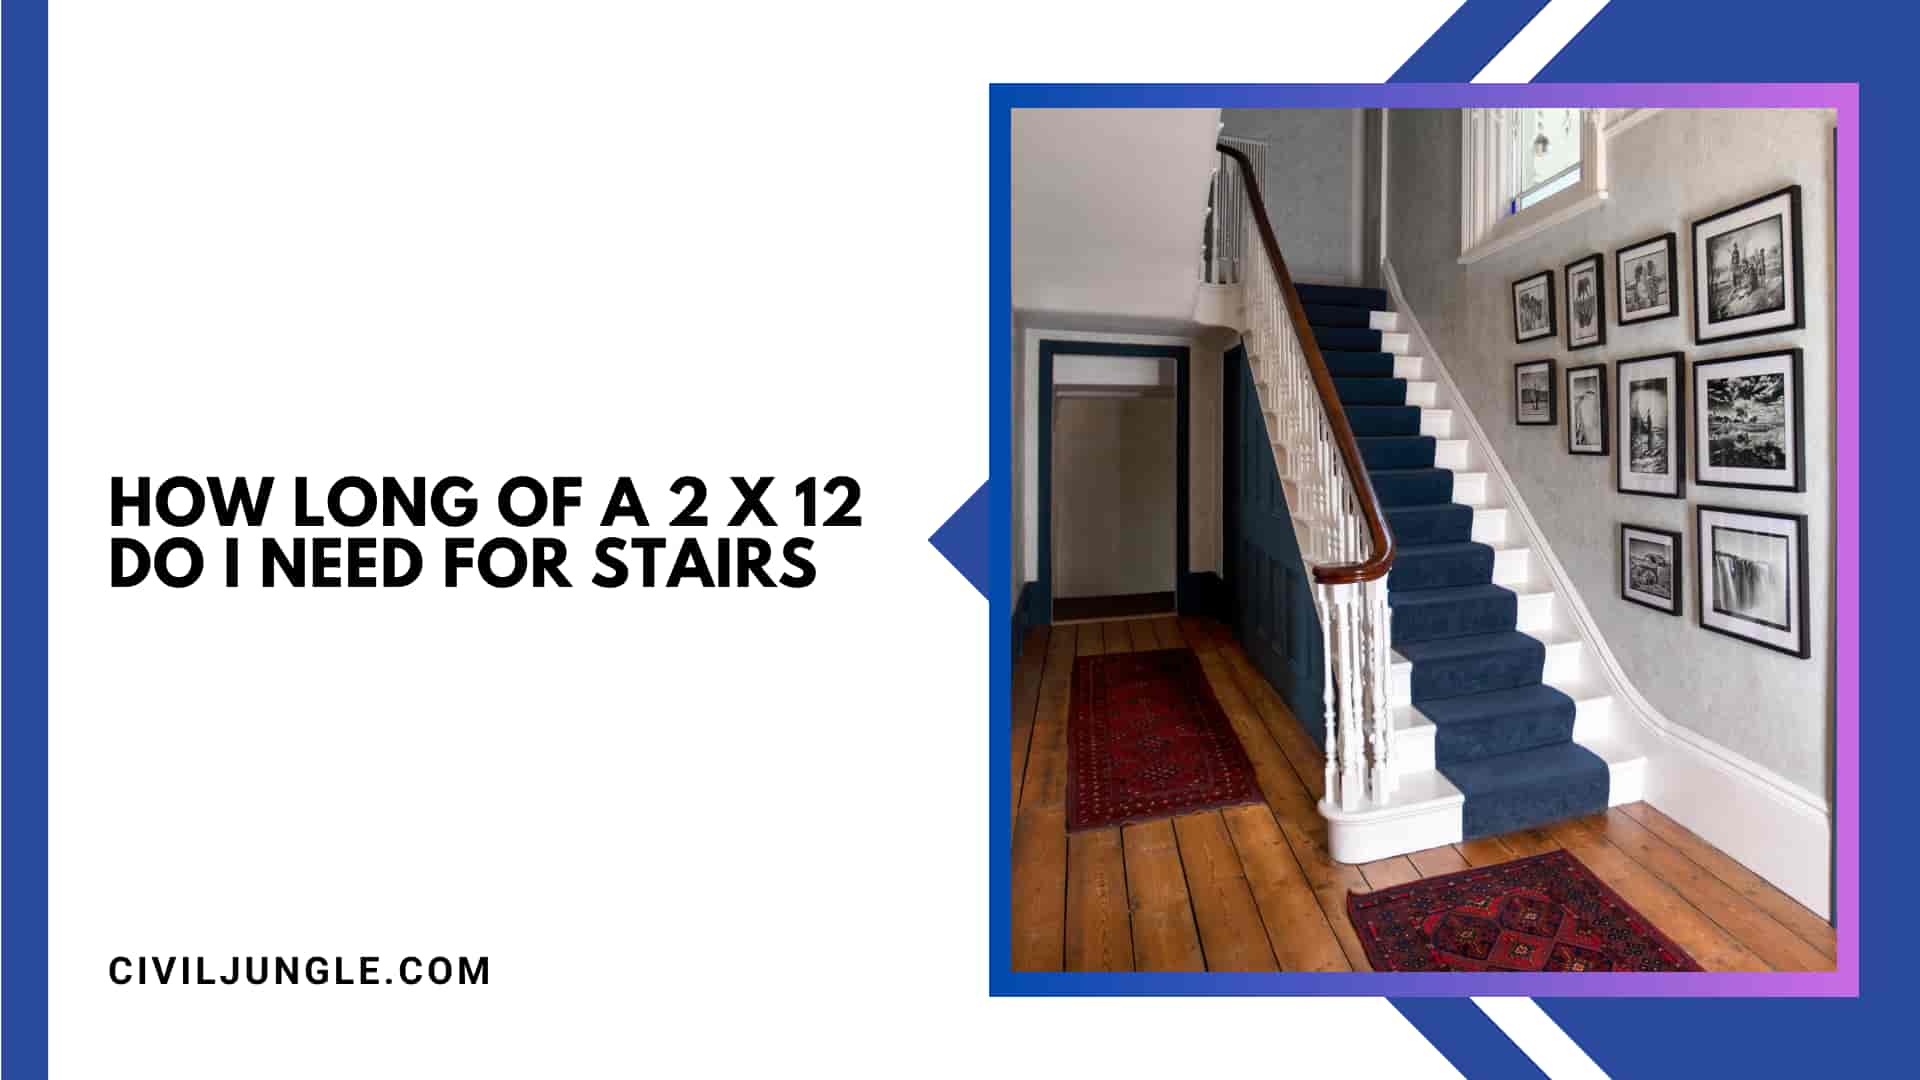 How Long of a 2 X 12 Do I Need for Stairs